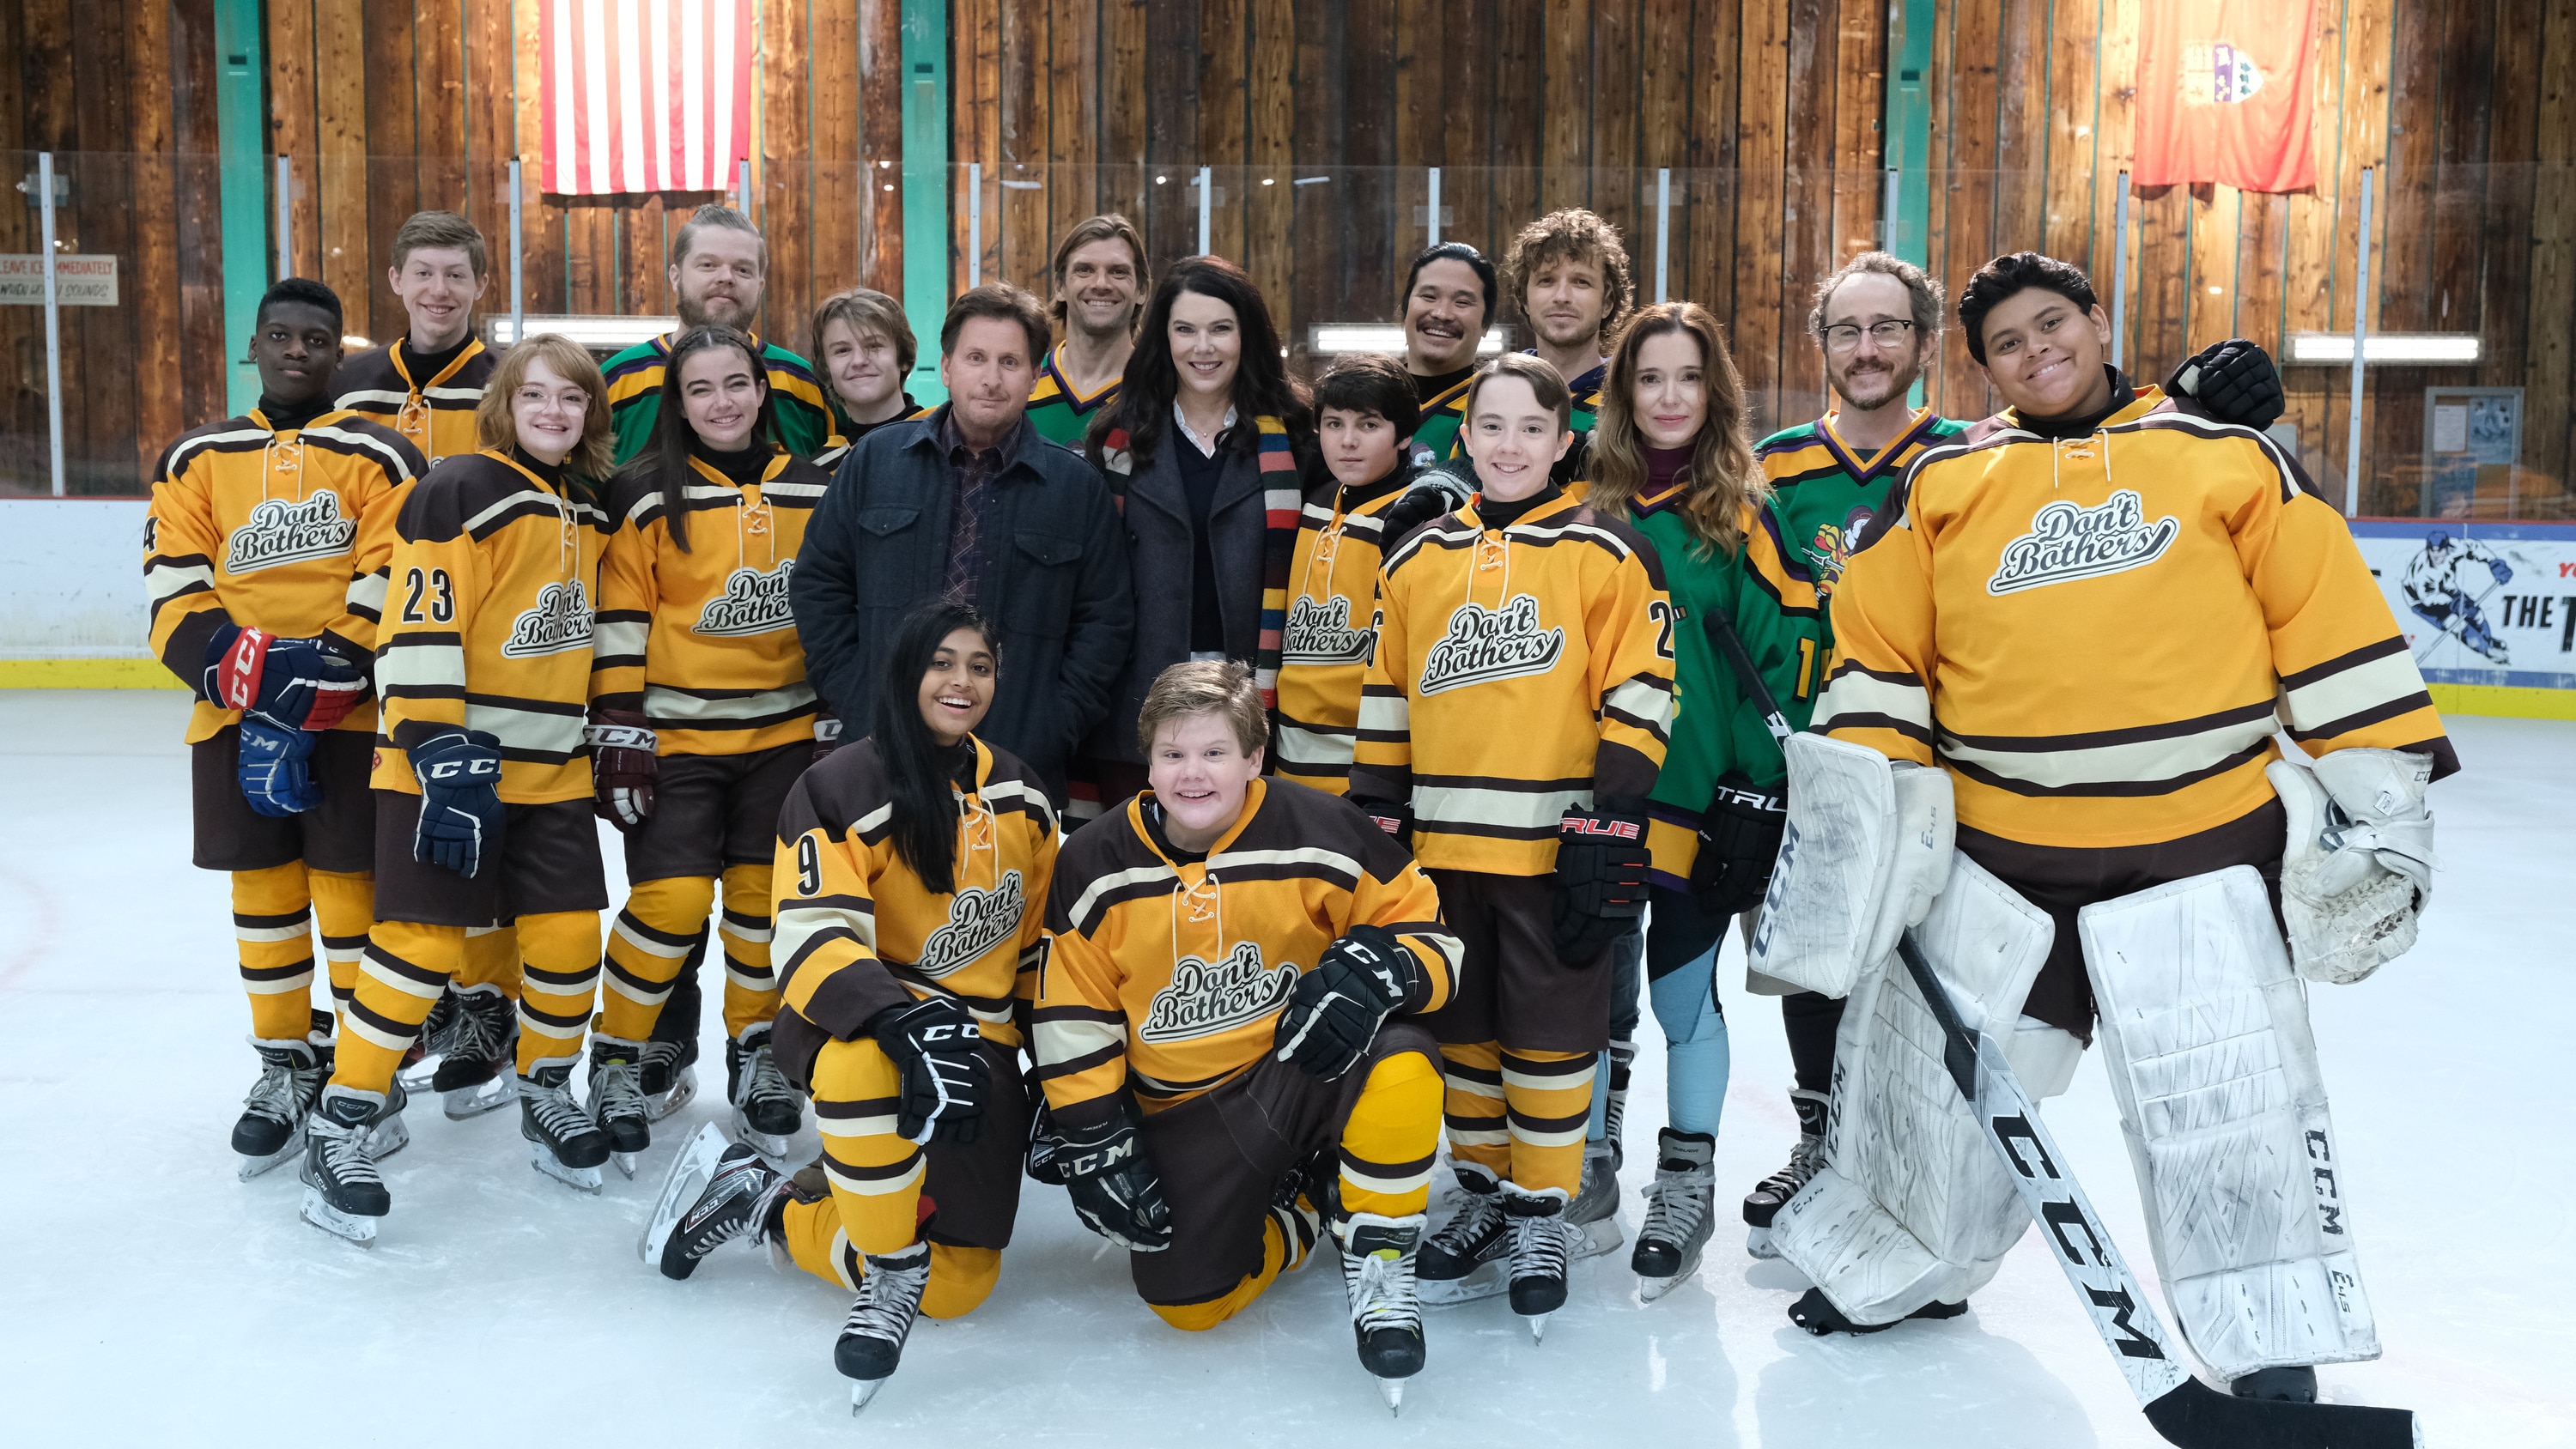 The Mighty Ducks: Game Changers Scores Season 2 Premiere Date